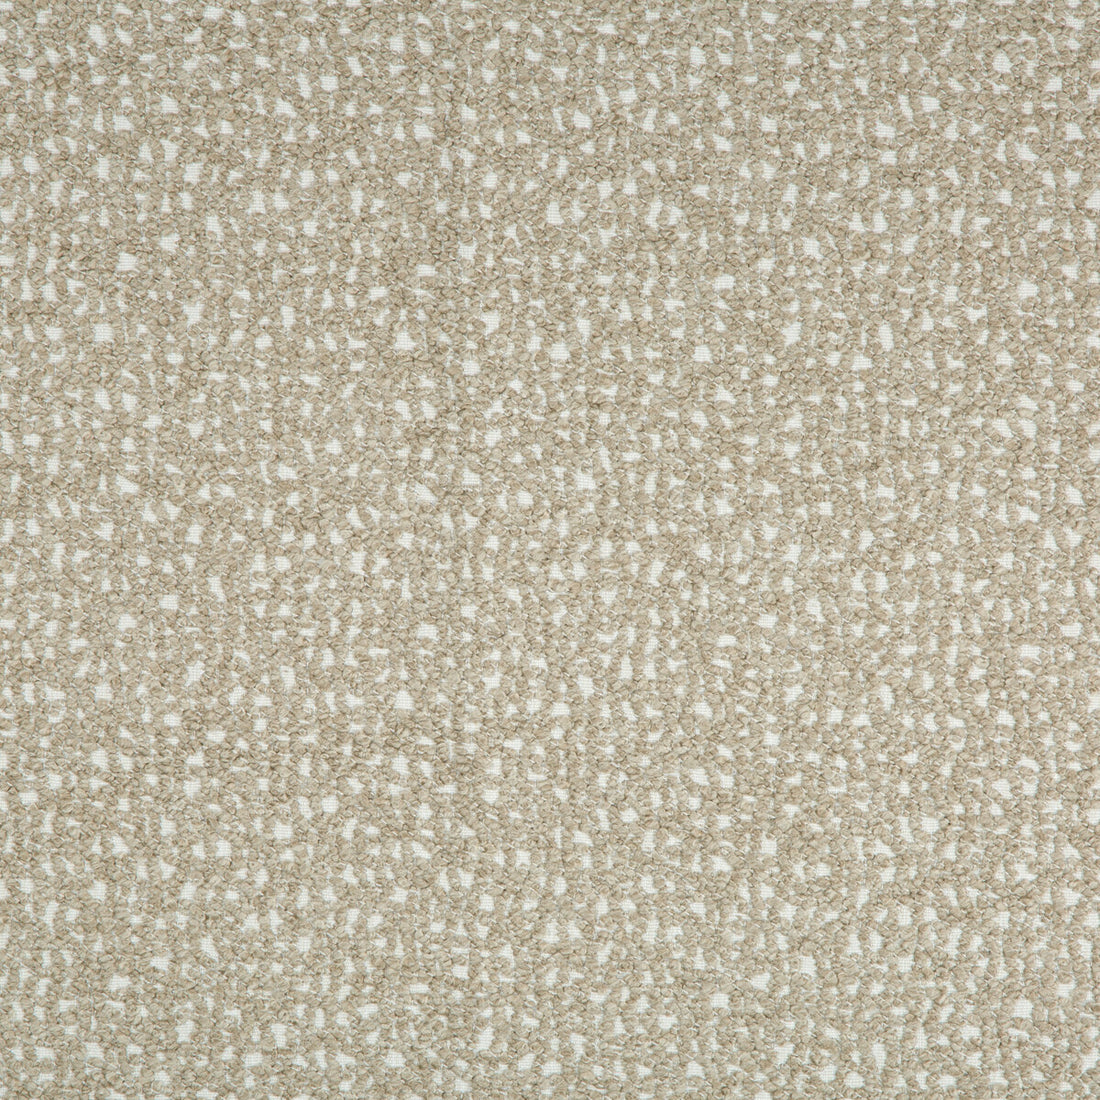 Serra fabric in pumice color - pattern GWF-3783.106.0 - by Lee Jofa Modern in the Kelly Wearstler Oculum Indoor/Outdoor collection